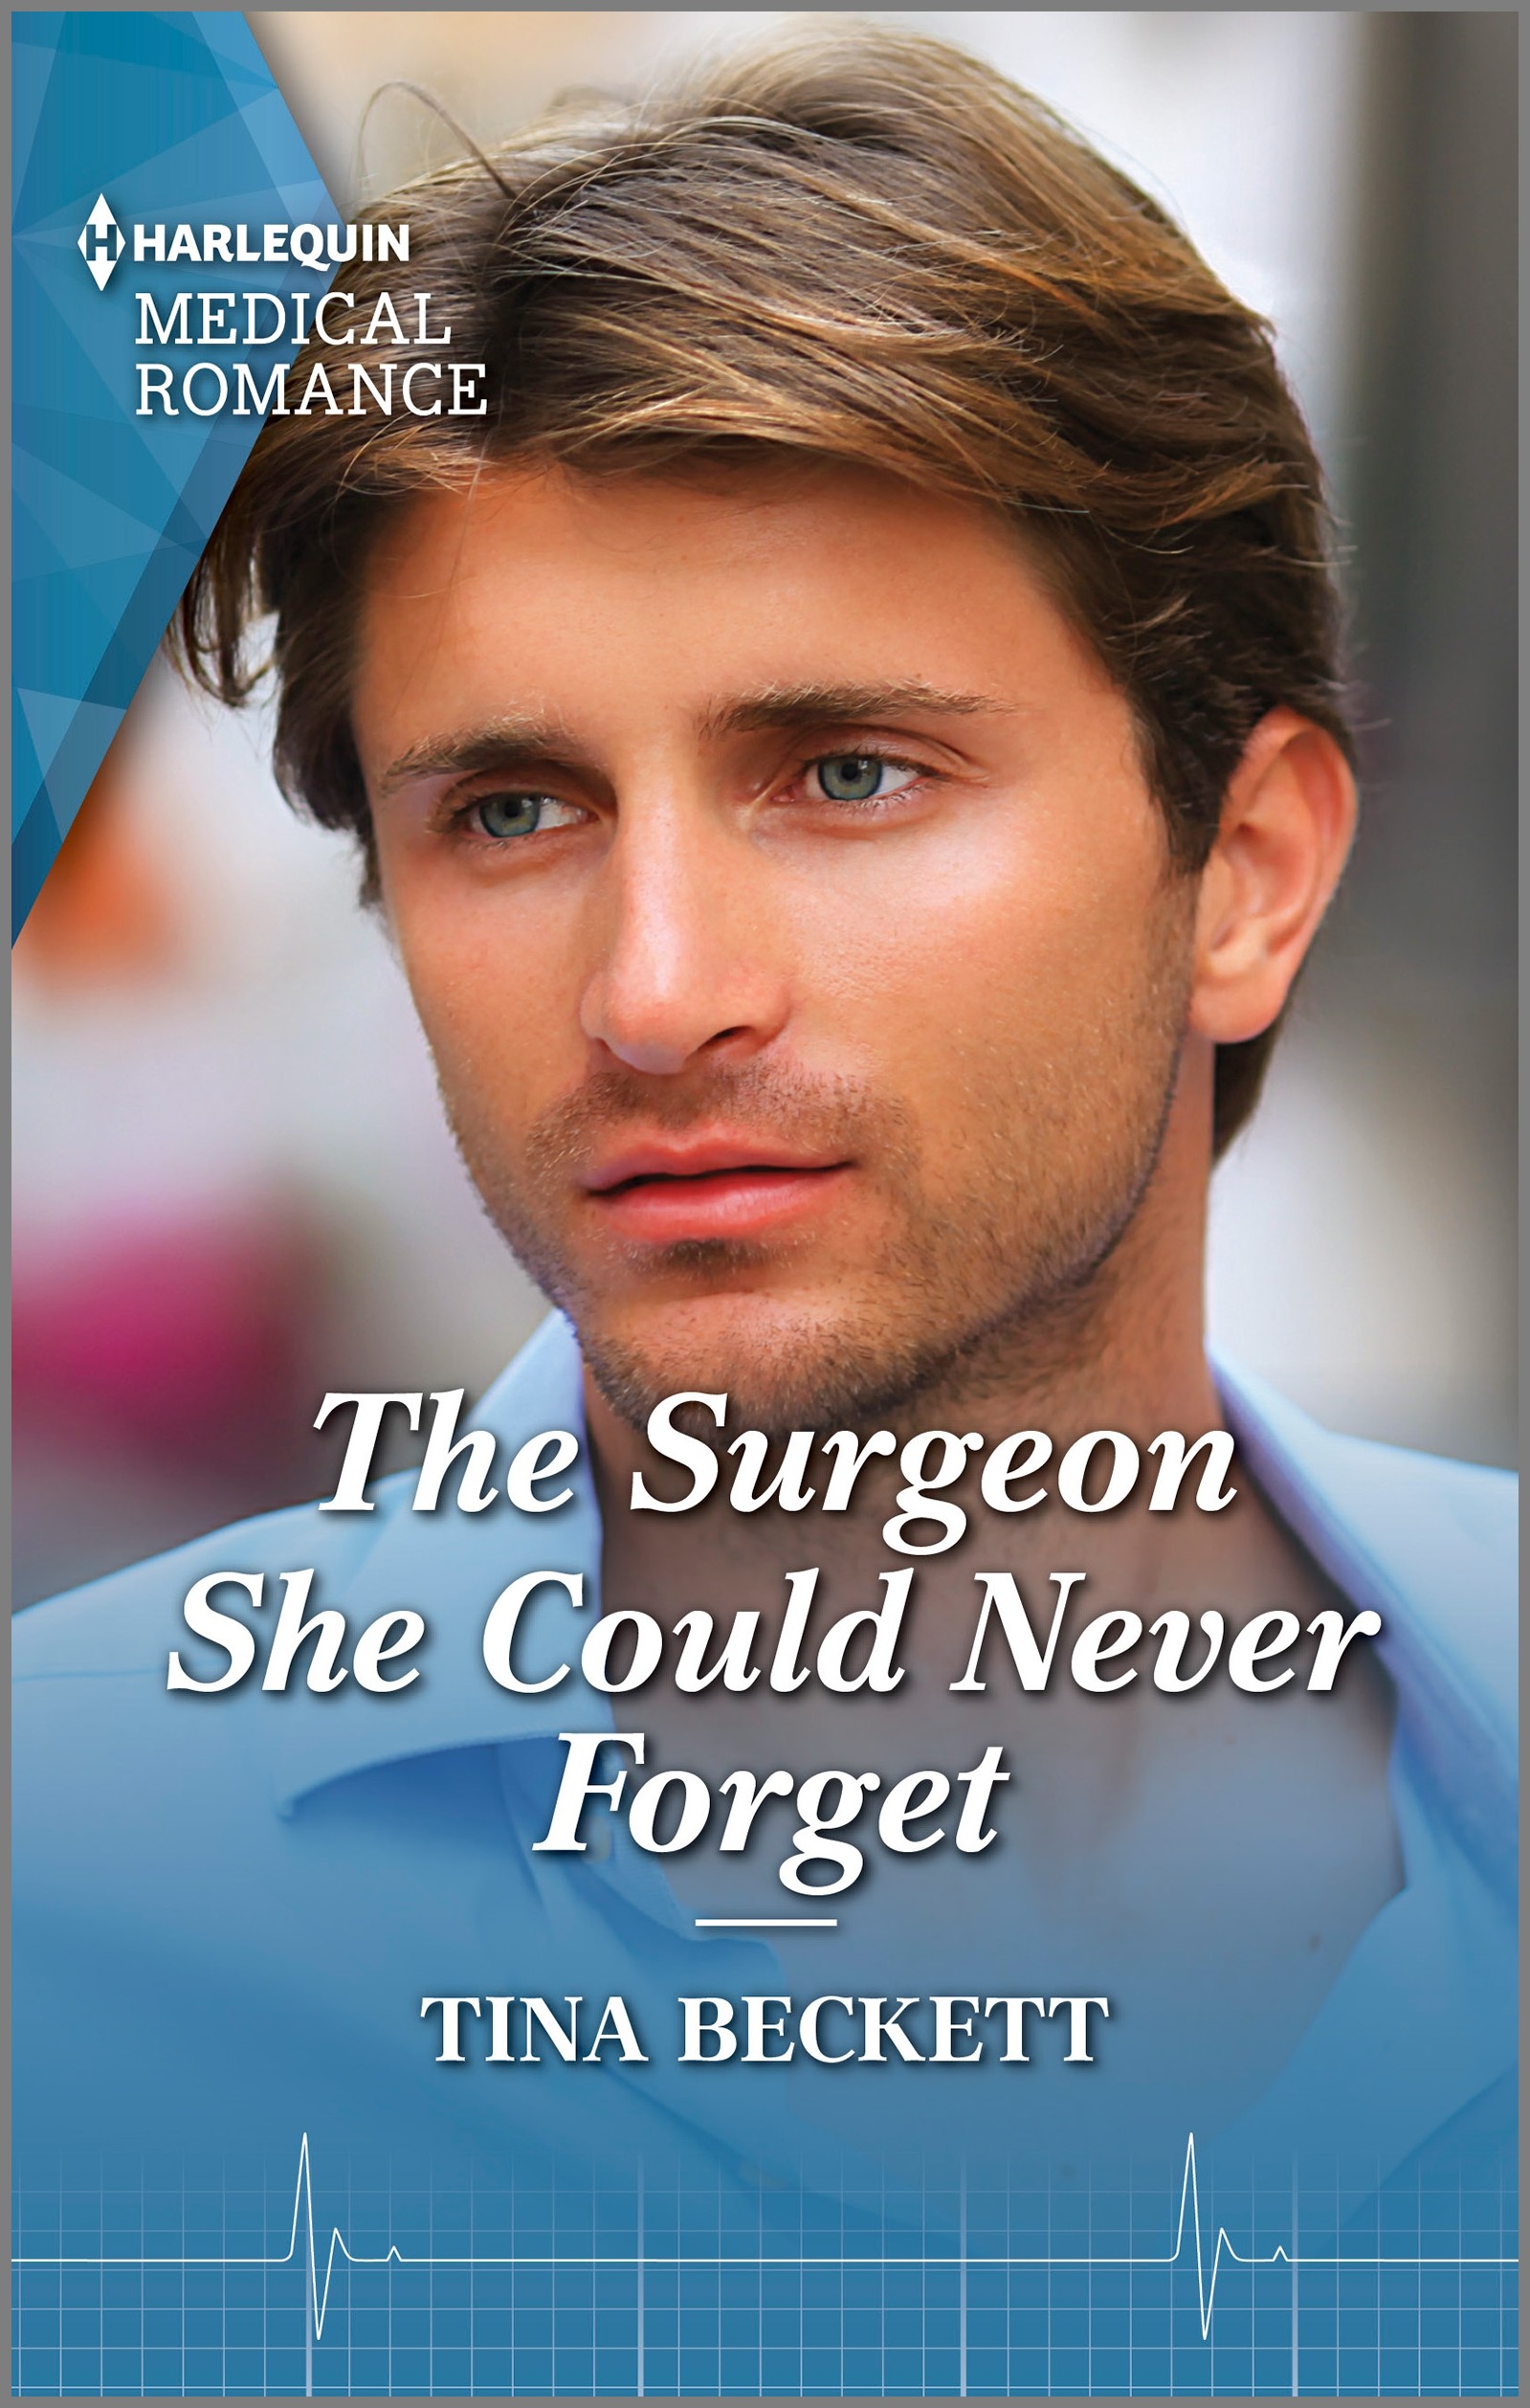 The Surgeon She Could Never Forget by Tina Beckett